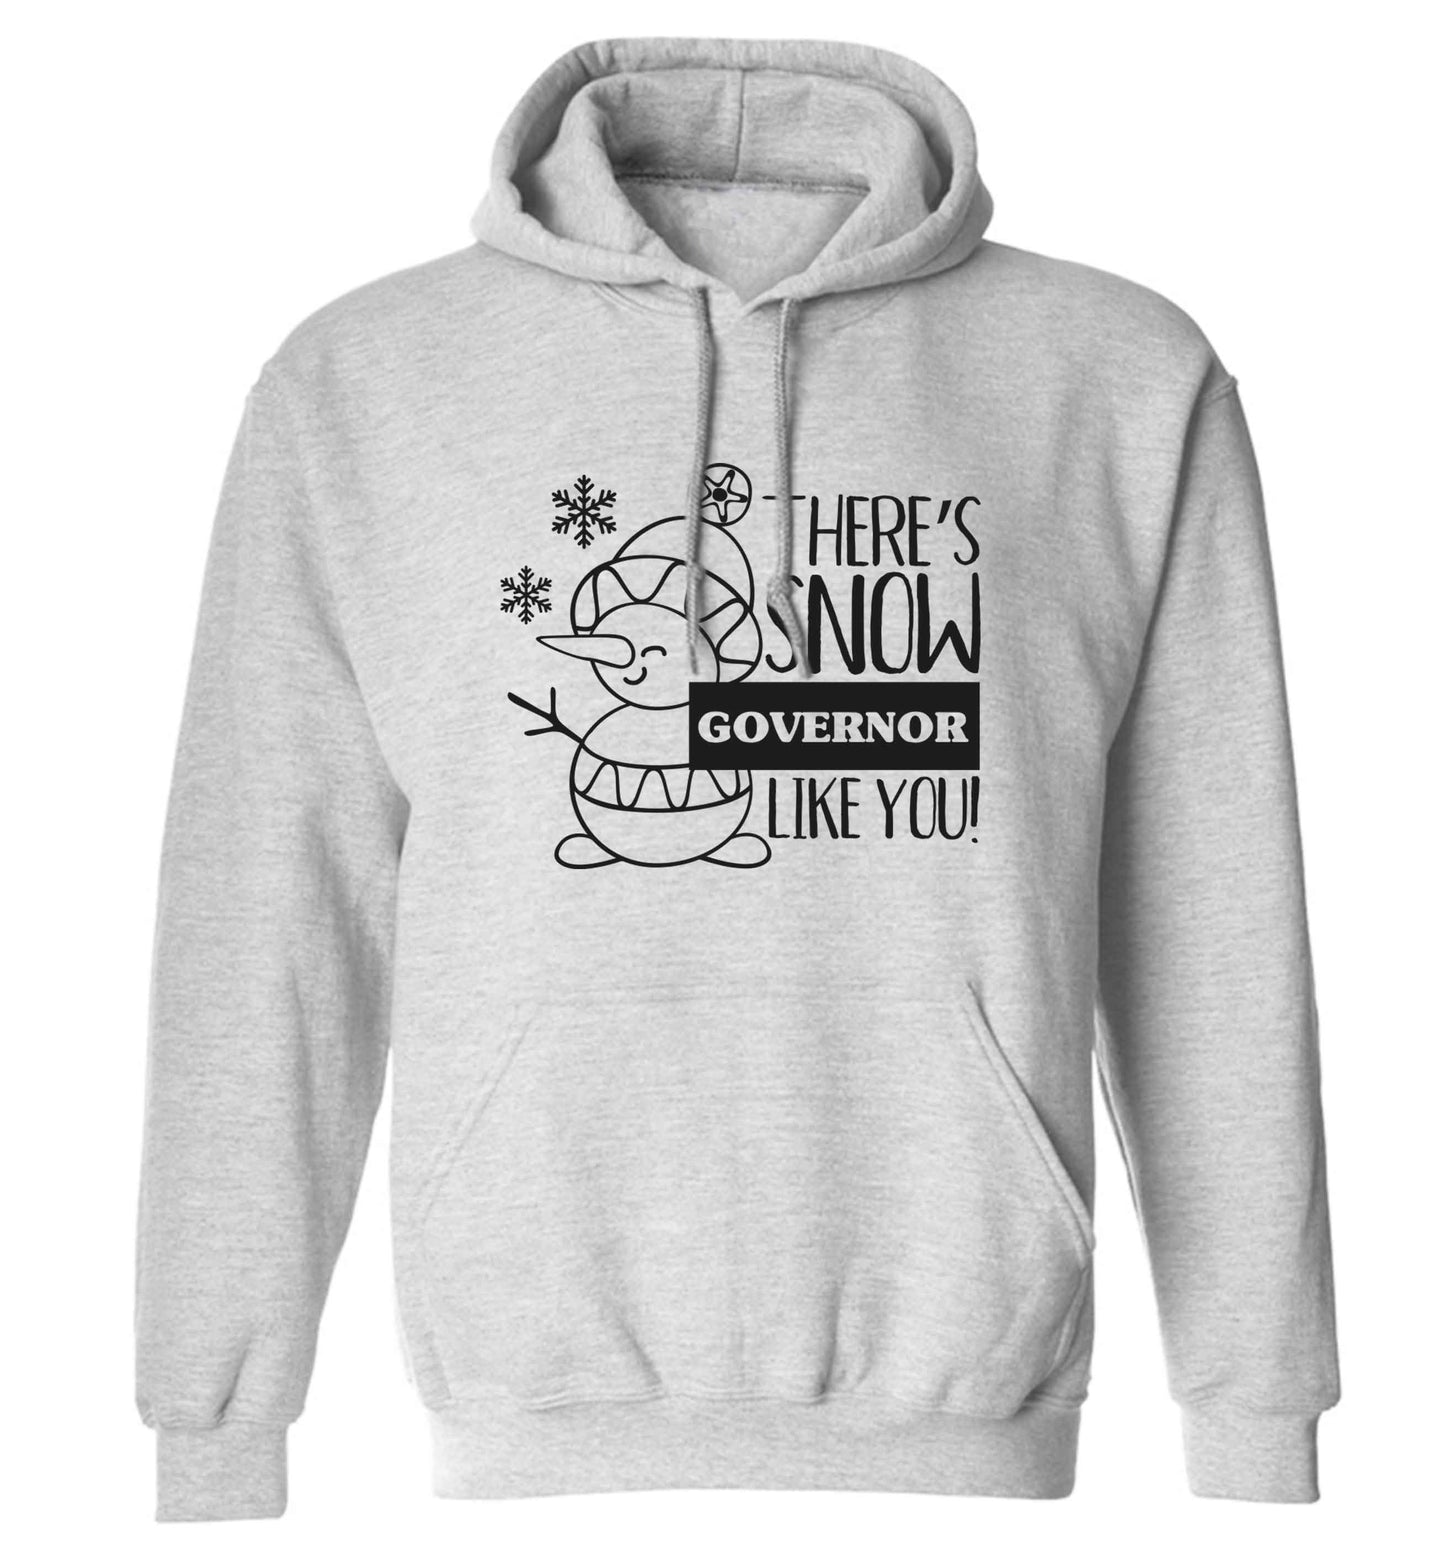 There's snow governor like you adults unisex grey hoodie 2XL